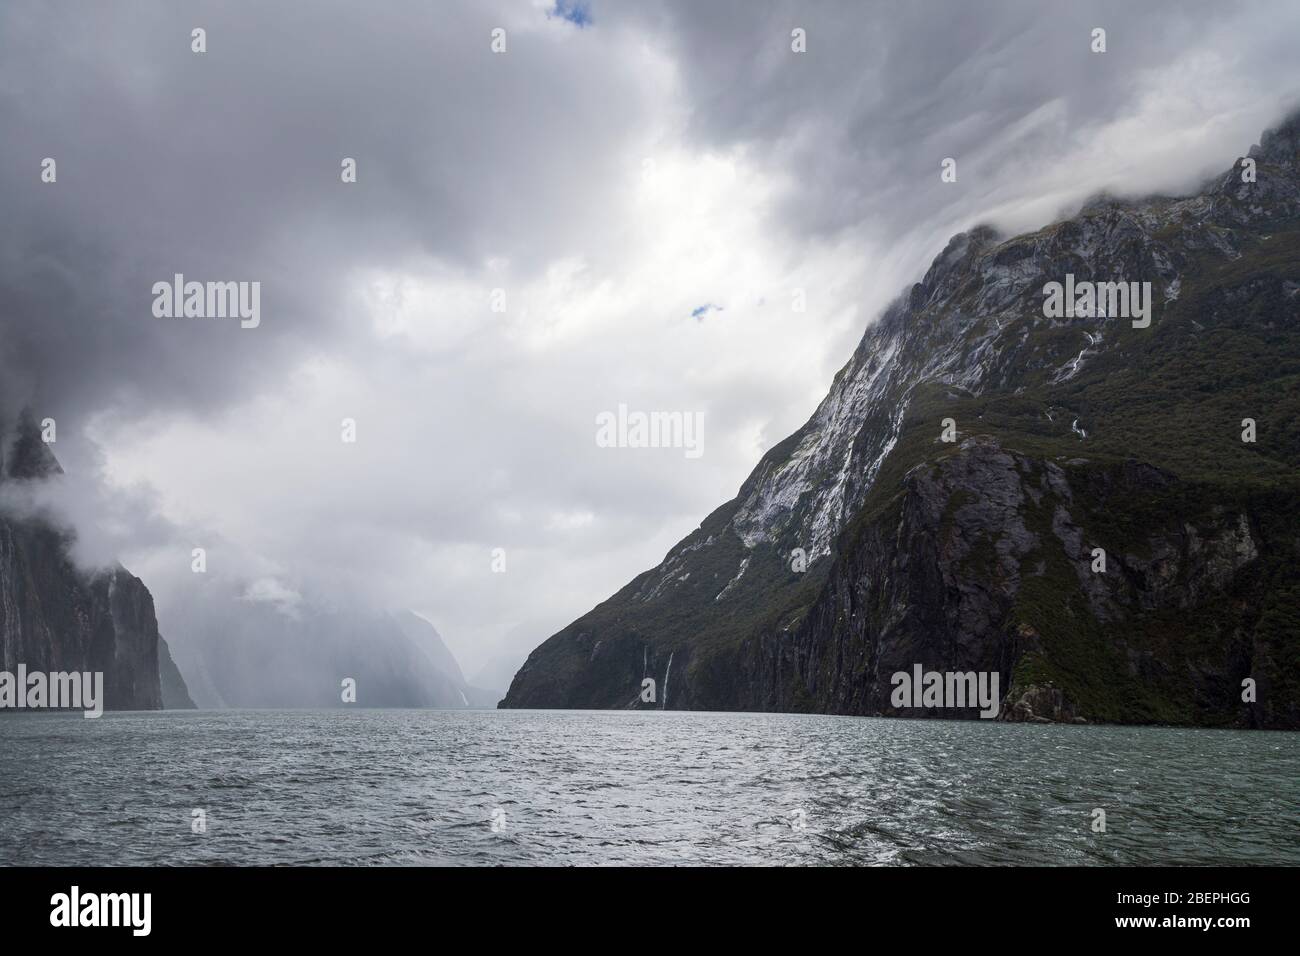 Stormy weather in Milford Sound, Fiordland National Park, South Island, New Zealand Stock Photo